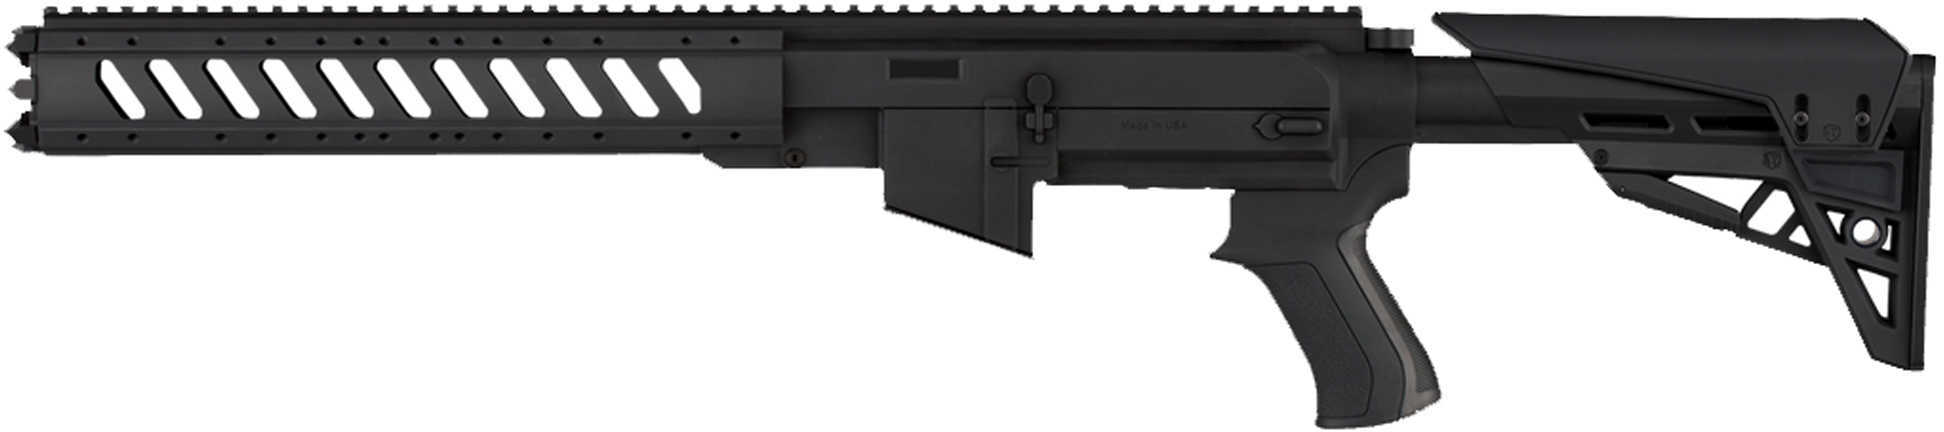 Adv. Tech. Ruger® AR22 Stock System W/ 6 Sided Forend